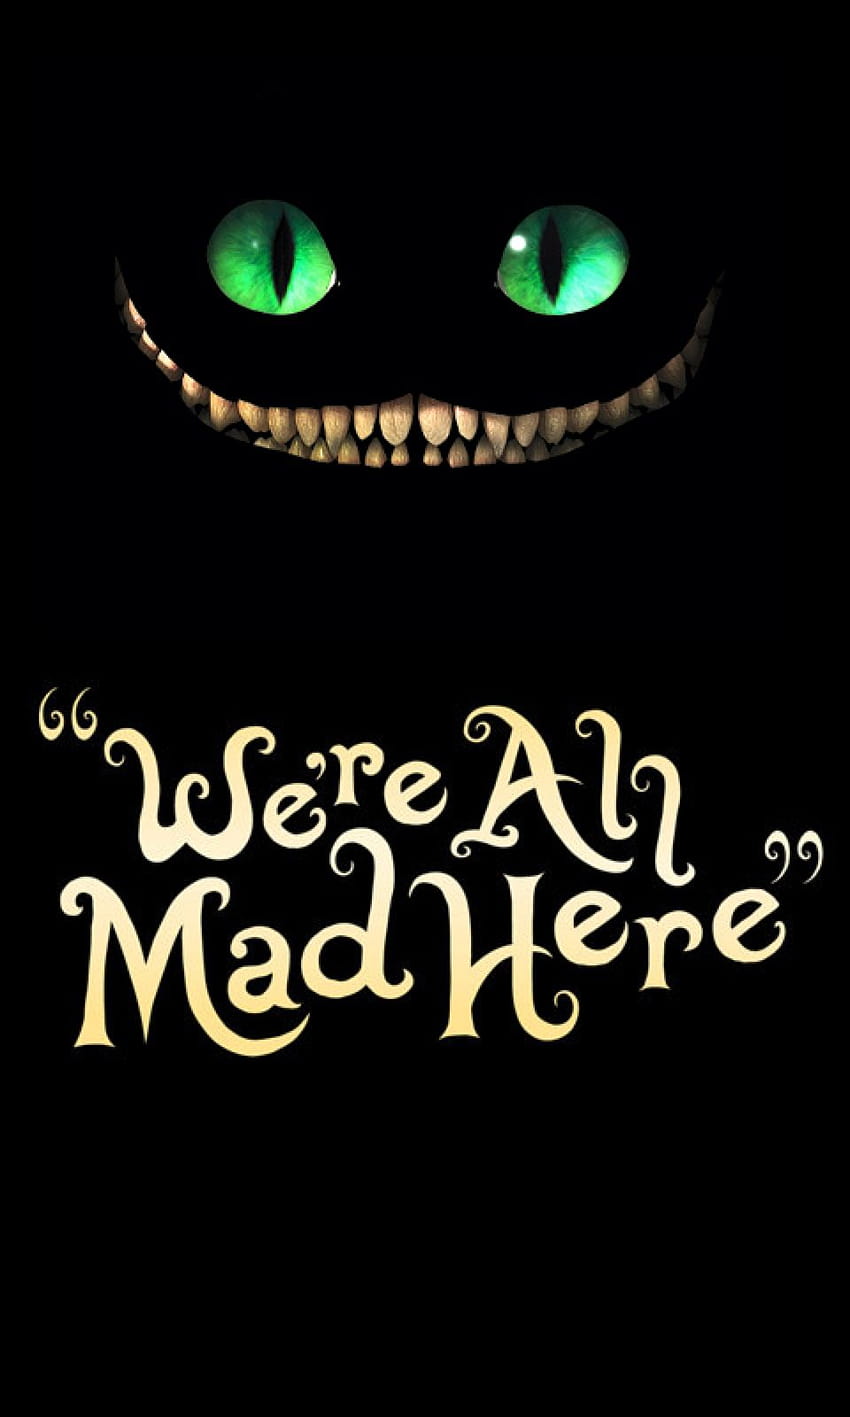 HD all mad here wallpapers  Peakpx